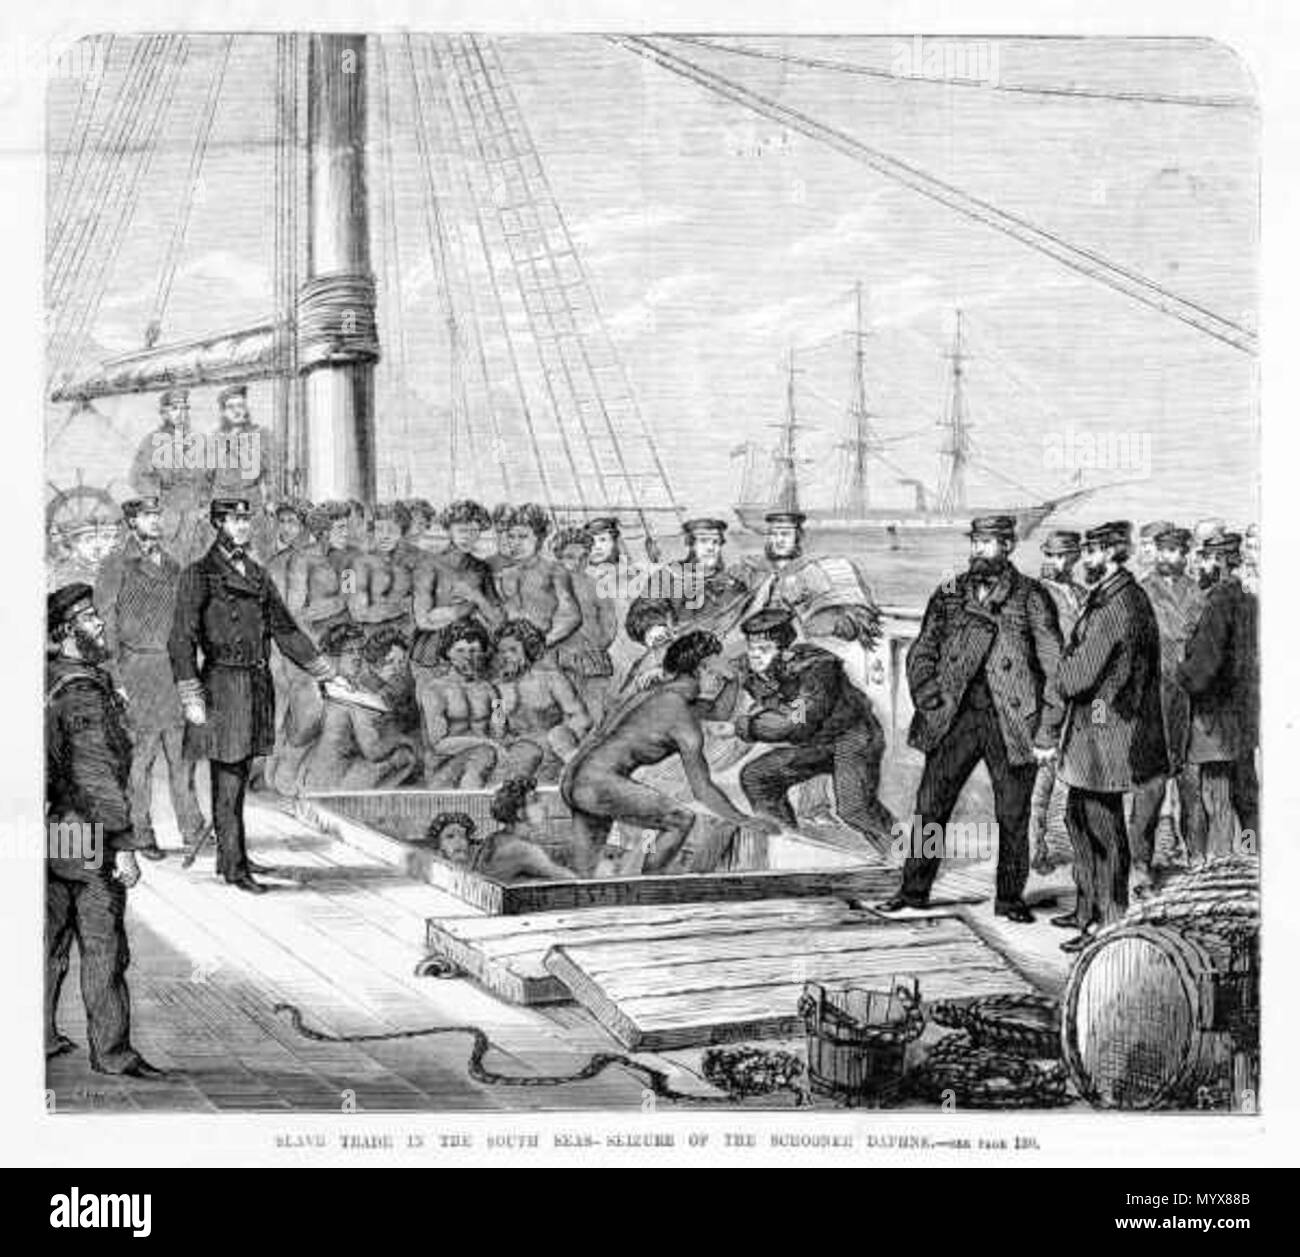 . Seizure of the blackbirding schooner Daphne and its cargo by the HMS Rosario in 1869. See 1868: At 9 pounds a person; Thomas Pritchard, Ross Lewin’s trade – was it slavery, recruiting or indentured labour?, and SLAVING IN AUSTRALIAN COURTS: BLACKBIRDING CASES, 1869-1871, Journal of South Pacific Law, Volume 4 (2000).  . 19 June 1869. Samuel Calvert (1828-1913) and Oswald Rose Campbell (1820-1887) 2 Seizure of blackbirder Daphne Stock Photo